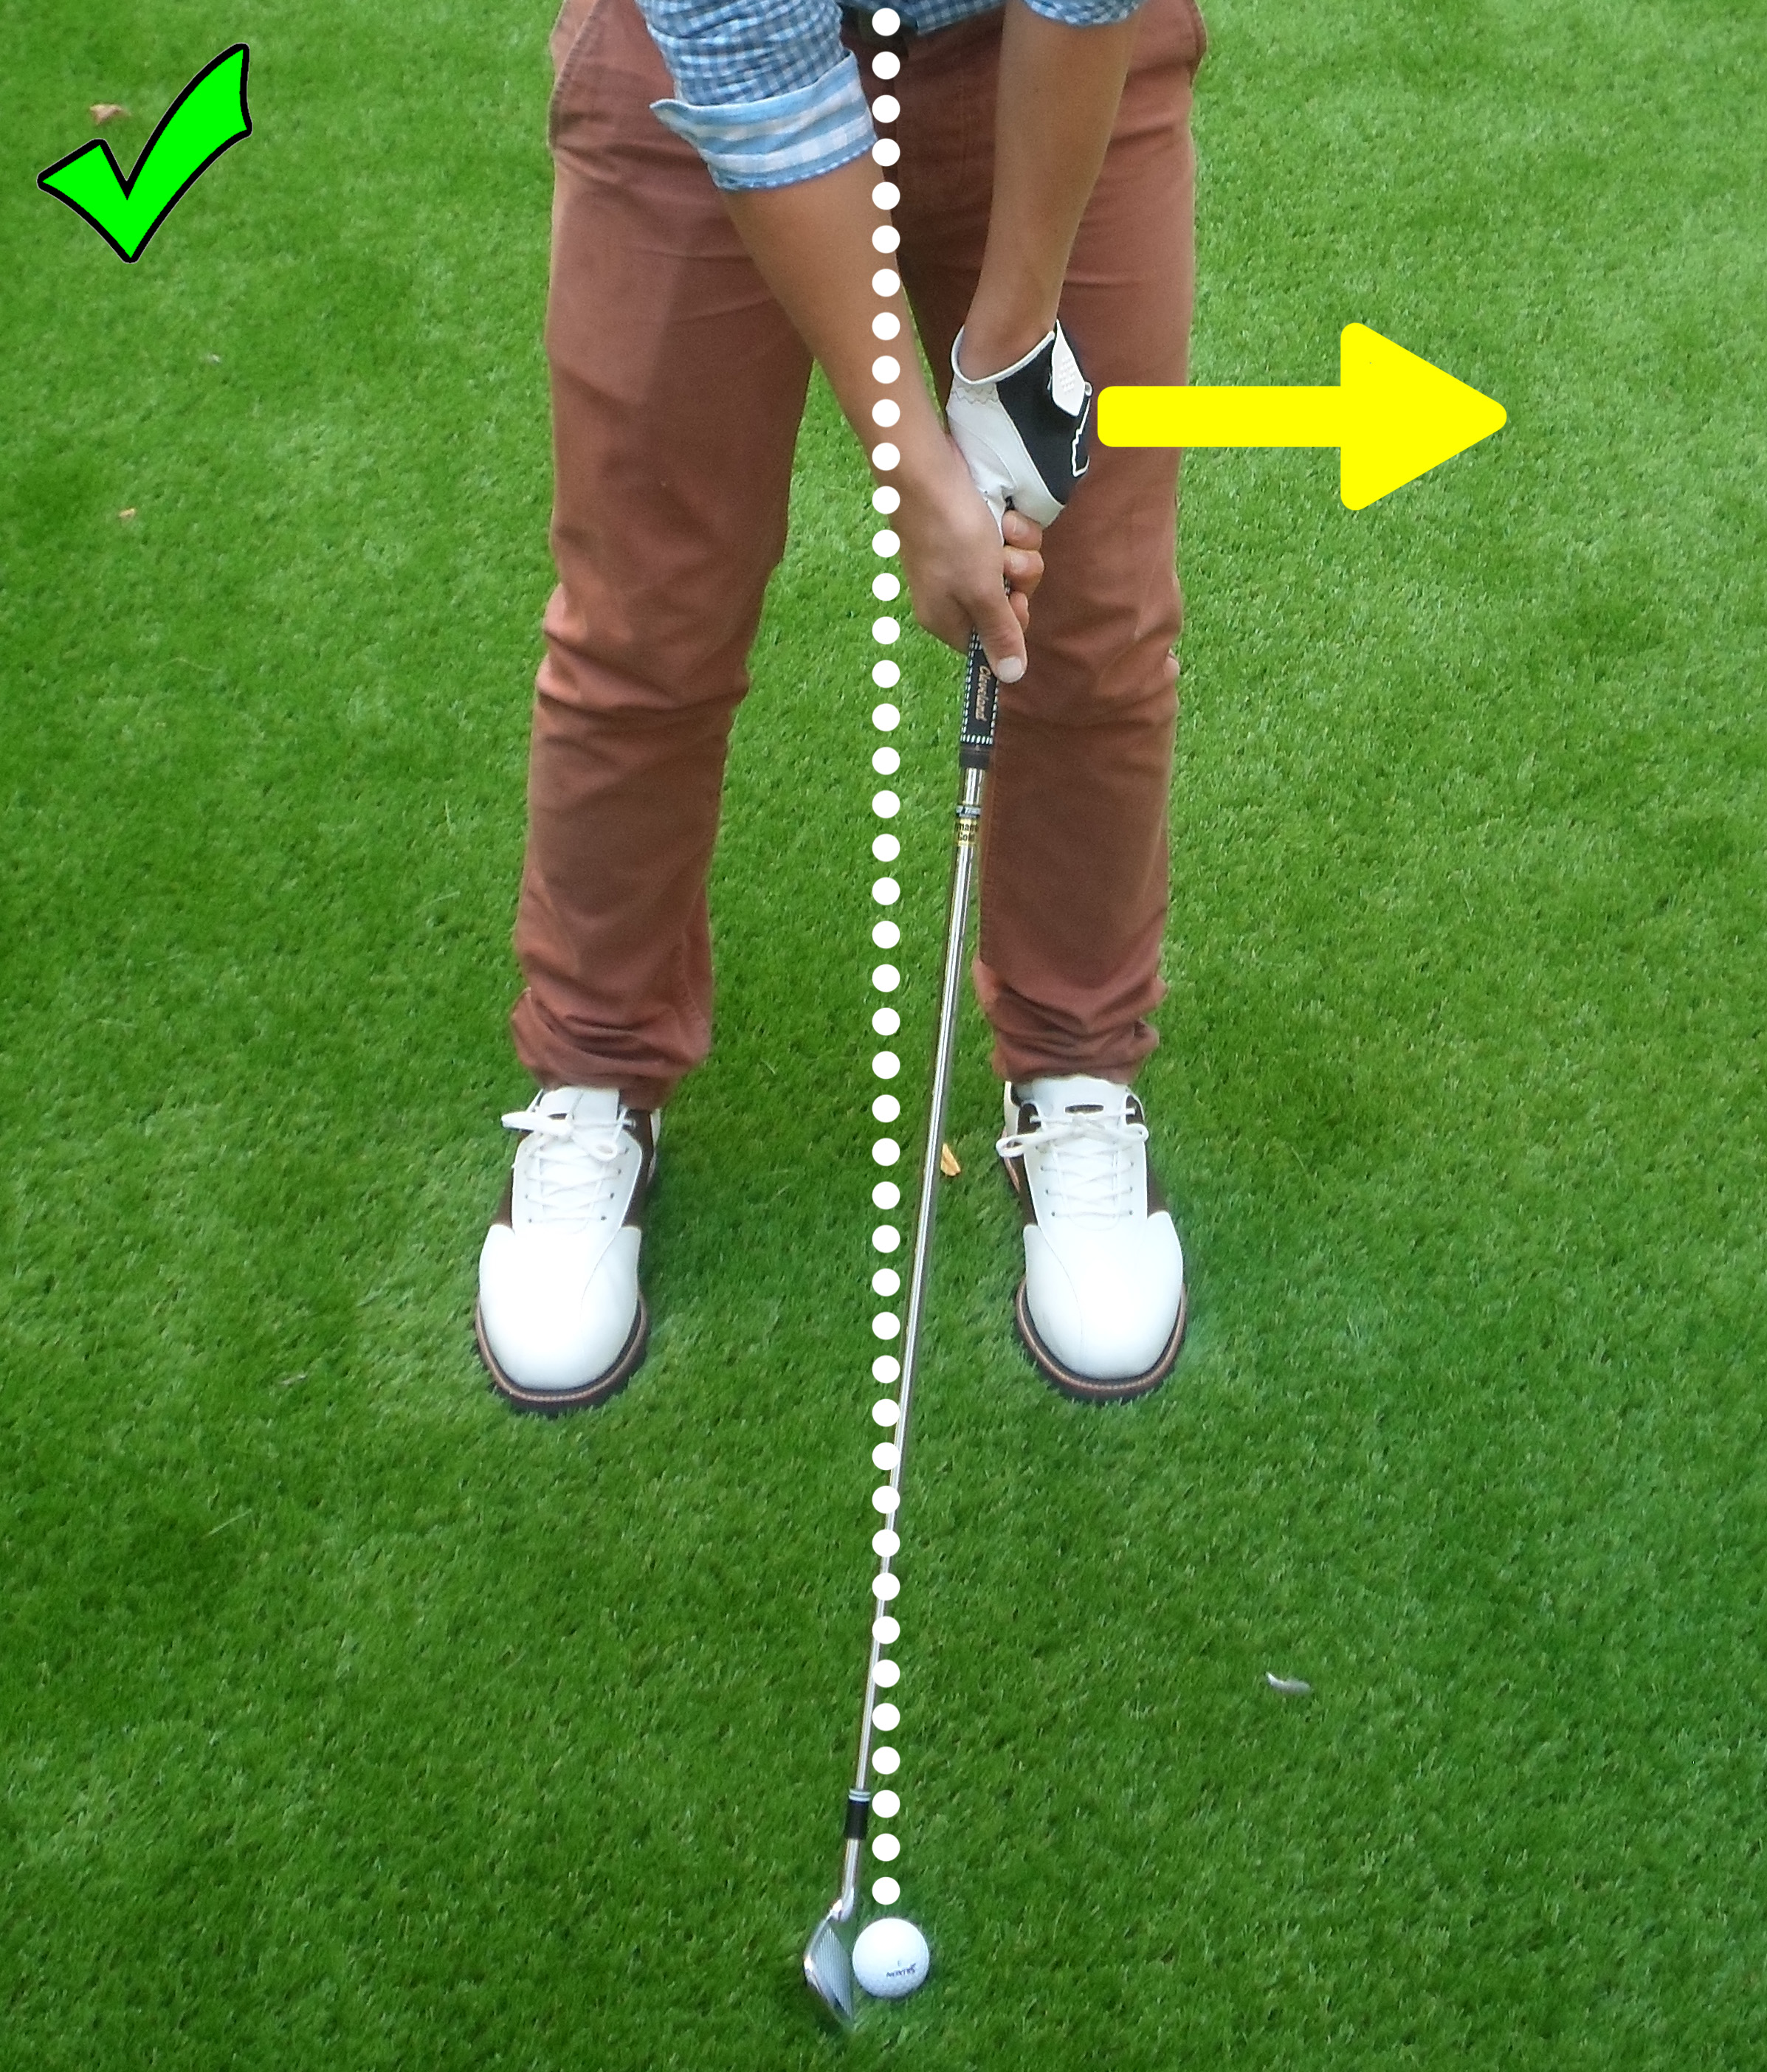 Fig.3 - Move the ball further back in your stance and push your hands and body weight forward (click to enlarge)